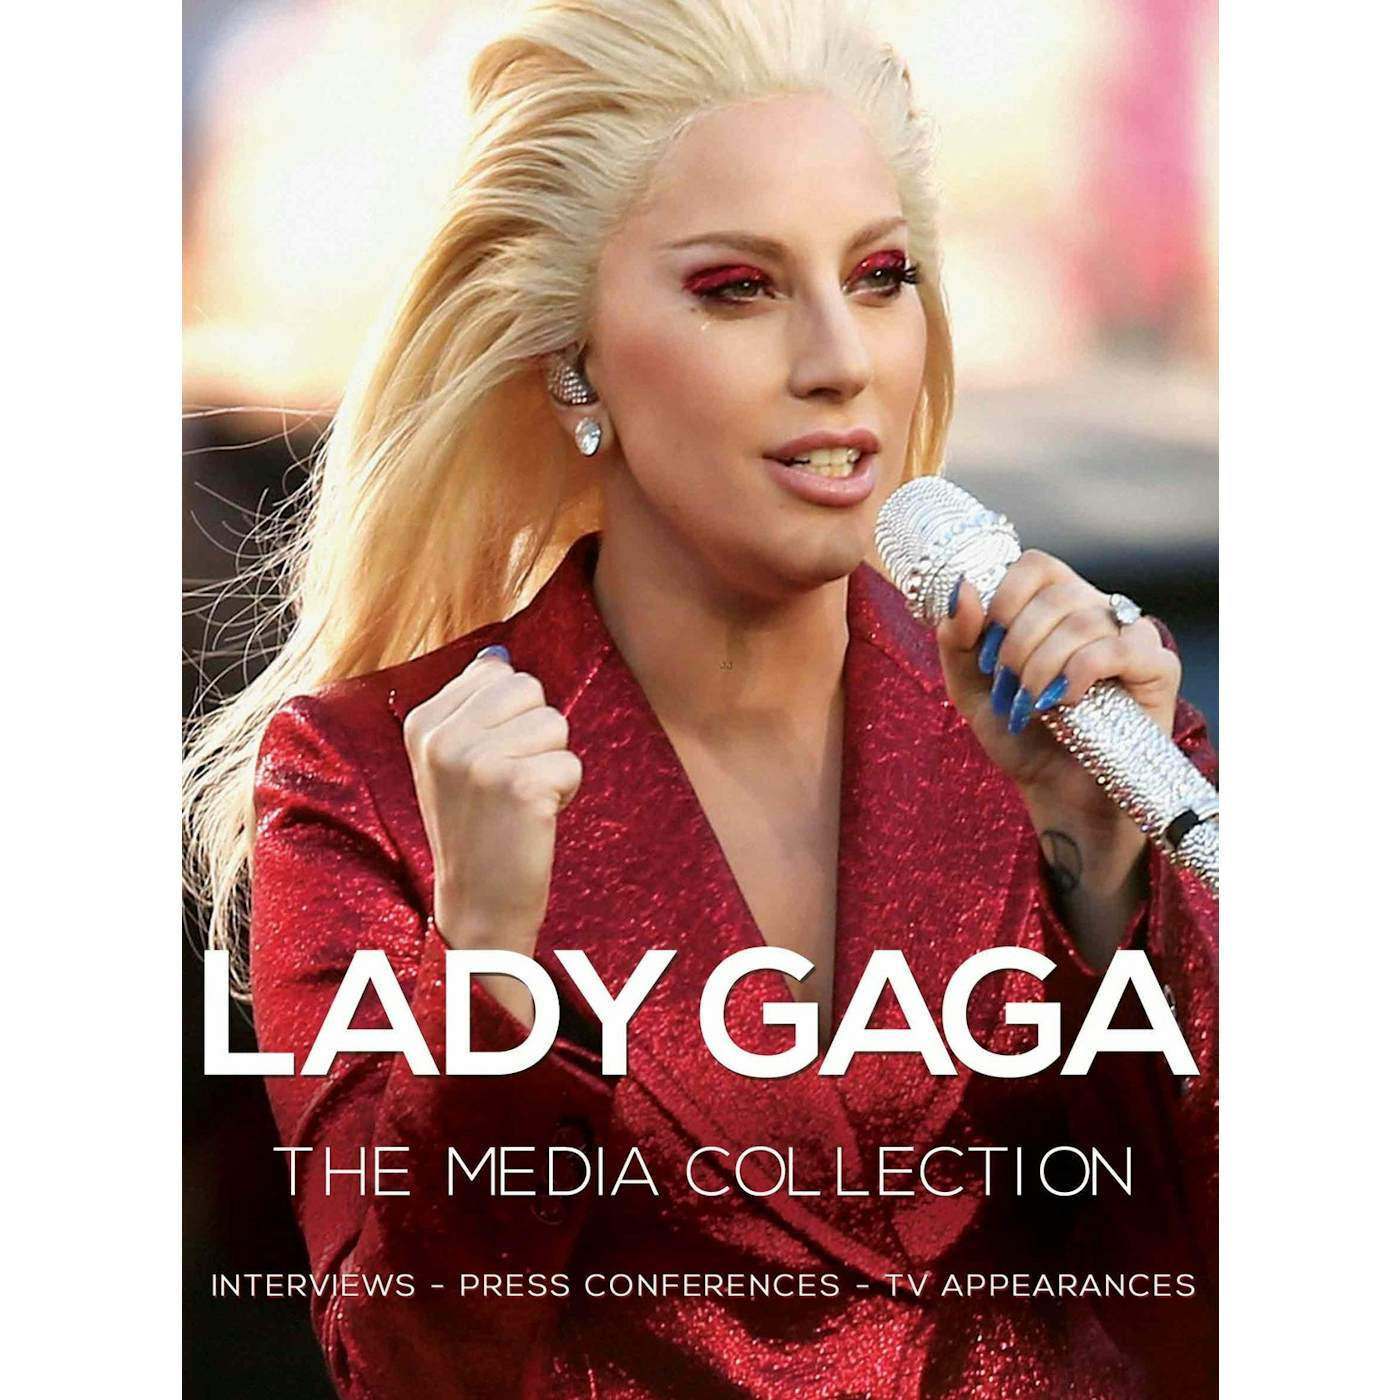 Lady Gaga DVD - The Media Collection